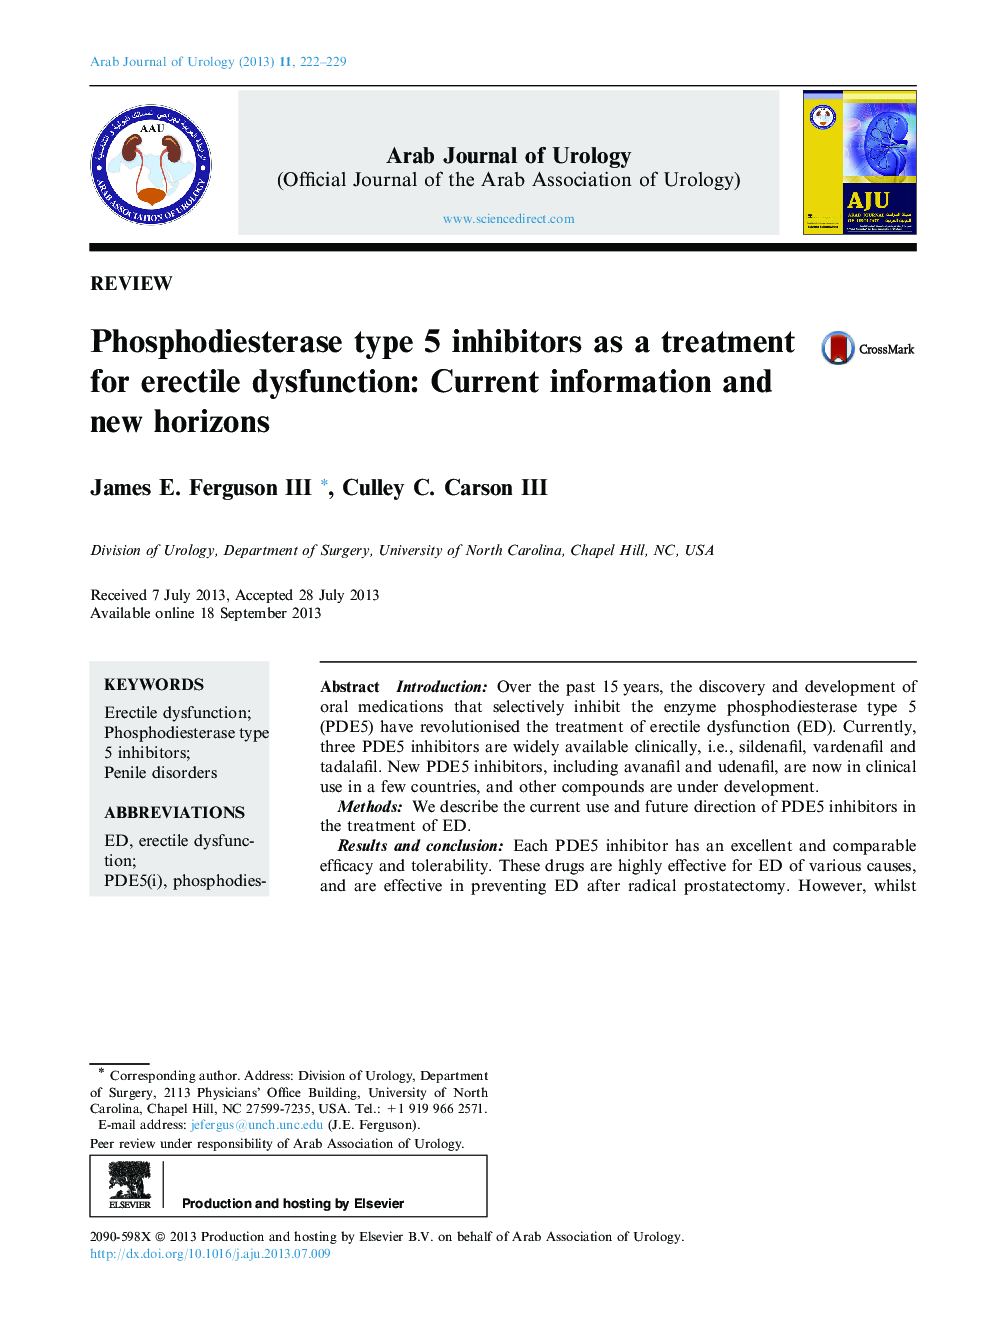 Phosphodiesterase type 5 inhibitors as a treatment for erectile dysfunction: Current information and new horizons 